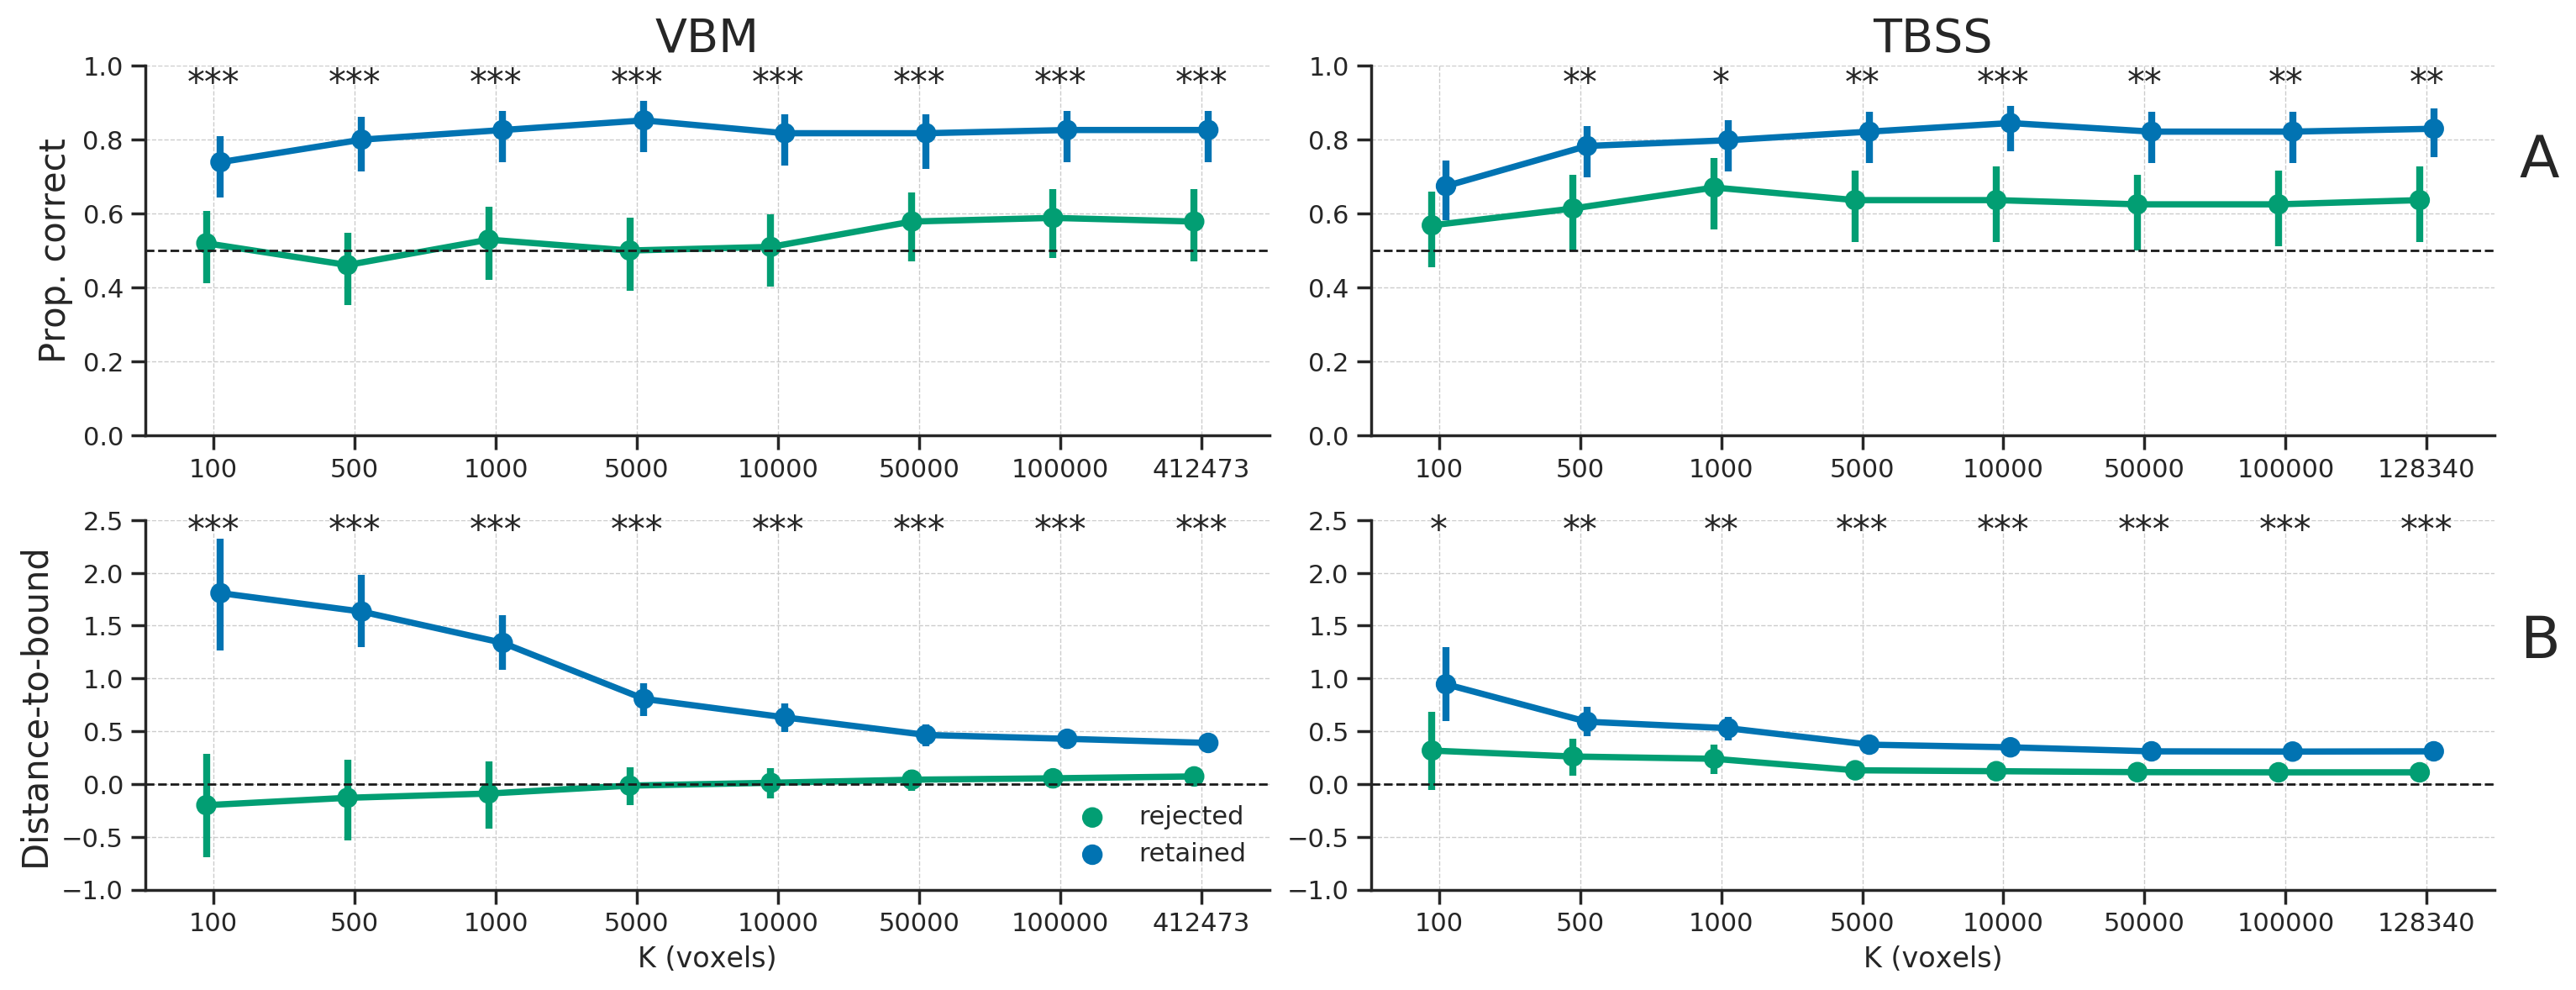 A) The proportion of samples classified correctly, separately for the “retained” samples (blue line) and “rejected” samples (green line); the dashed line represents chance level (0.5). B) The average distance to the classification boundary for the retained and rejected samples; the dashed line represents the decision boundary, with values below the line representing samples on the “wrong” side of the boundary (and vice versa). Asterisks indicates a significant difference between the retained and rejected samples: *** = \(p < 0.001\), ** = \(p < 0.01\), * = \(p < 0.05\).